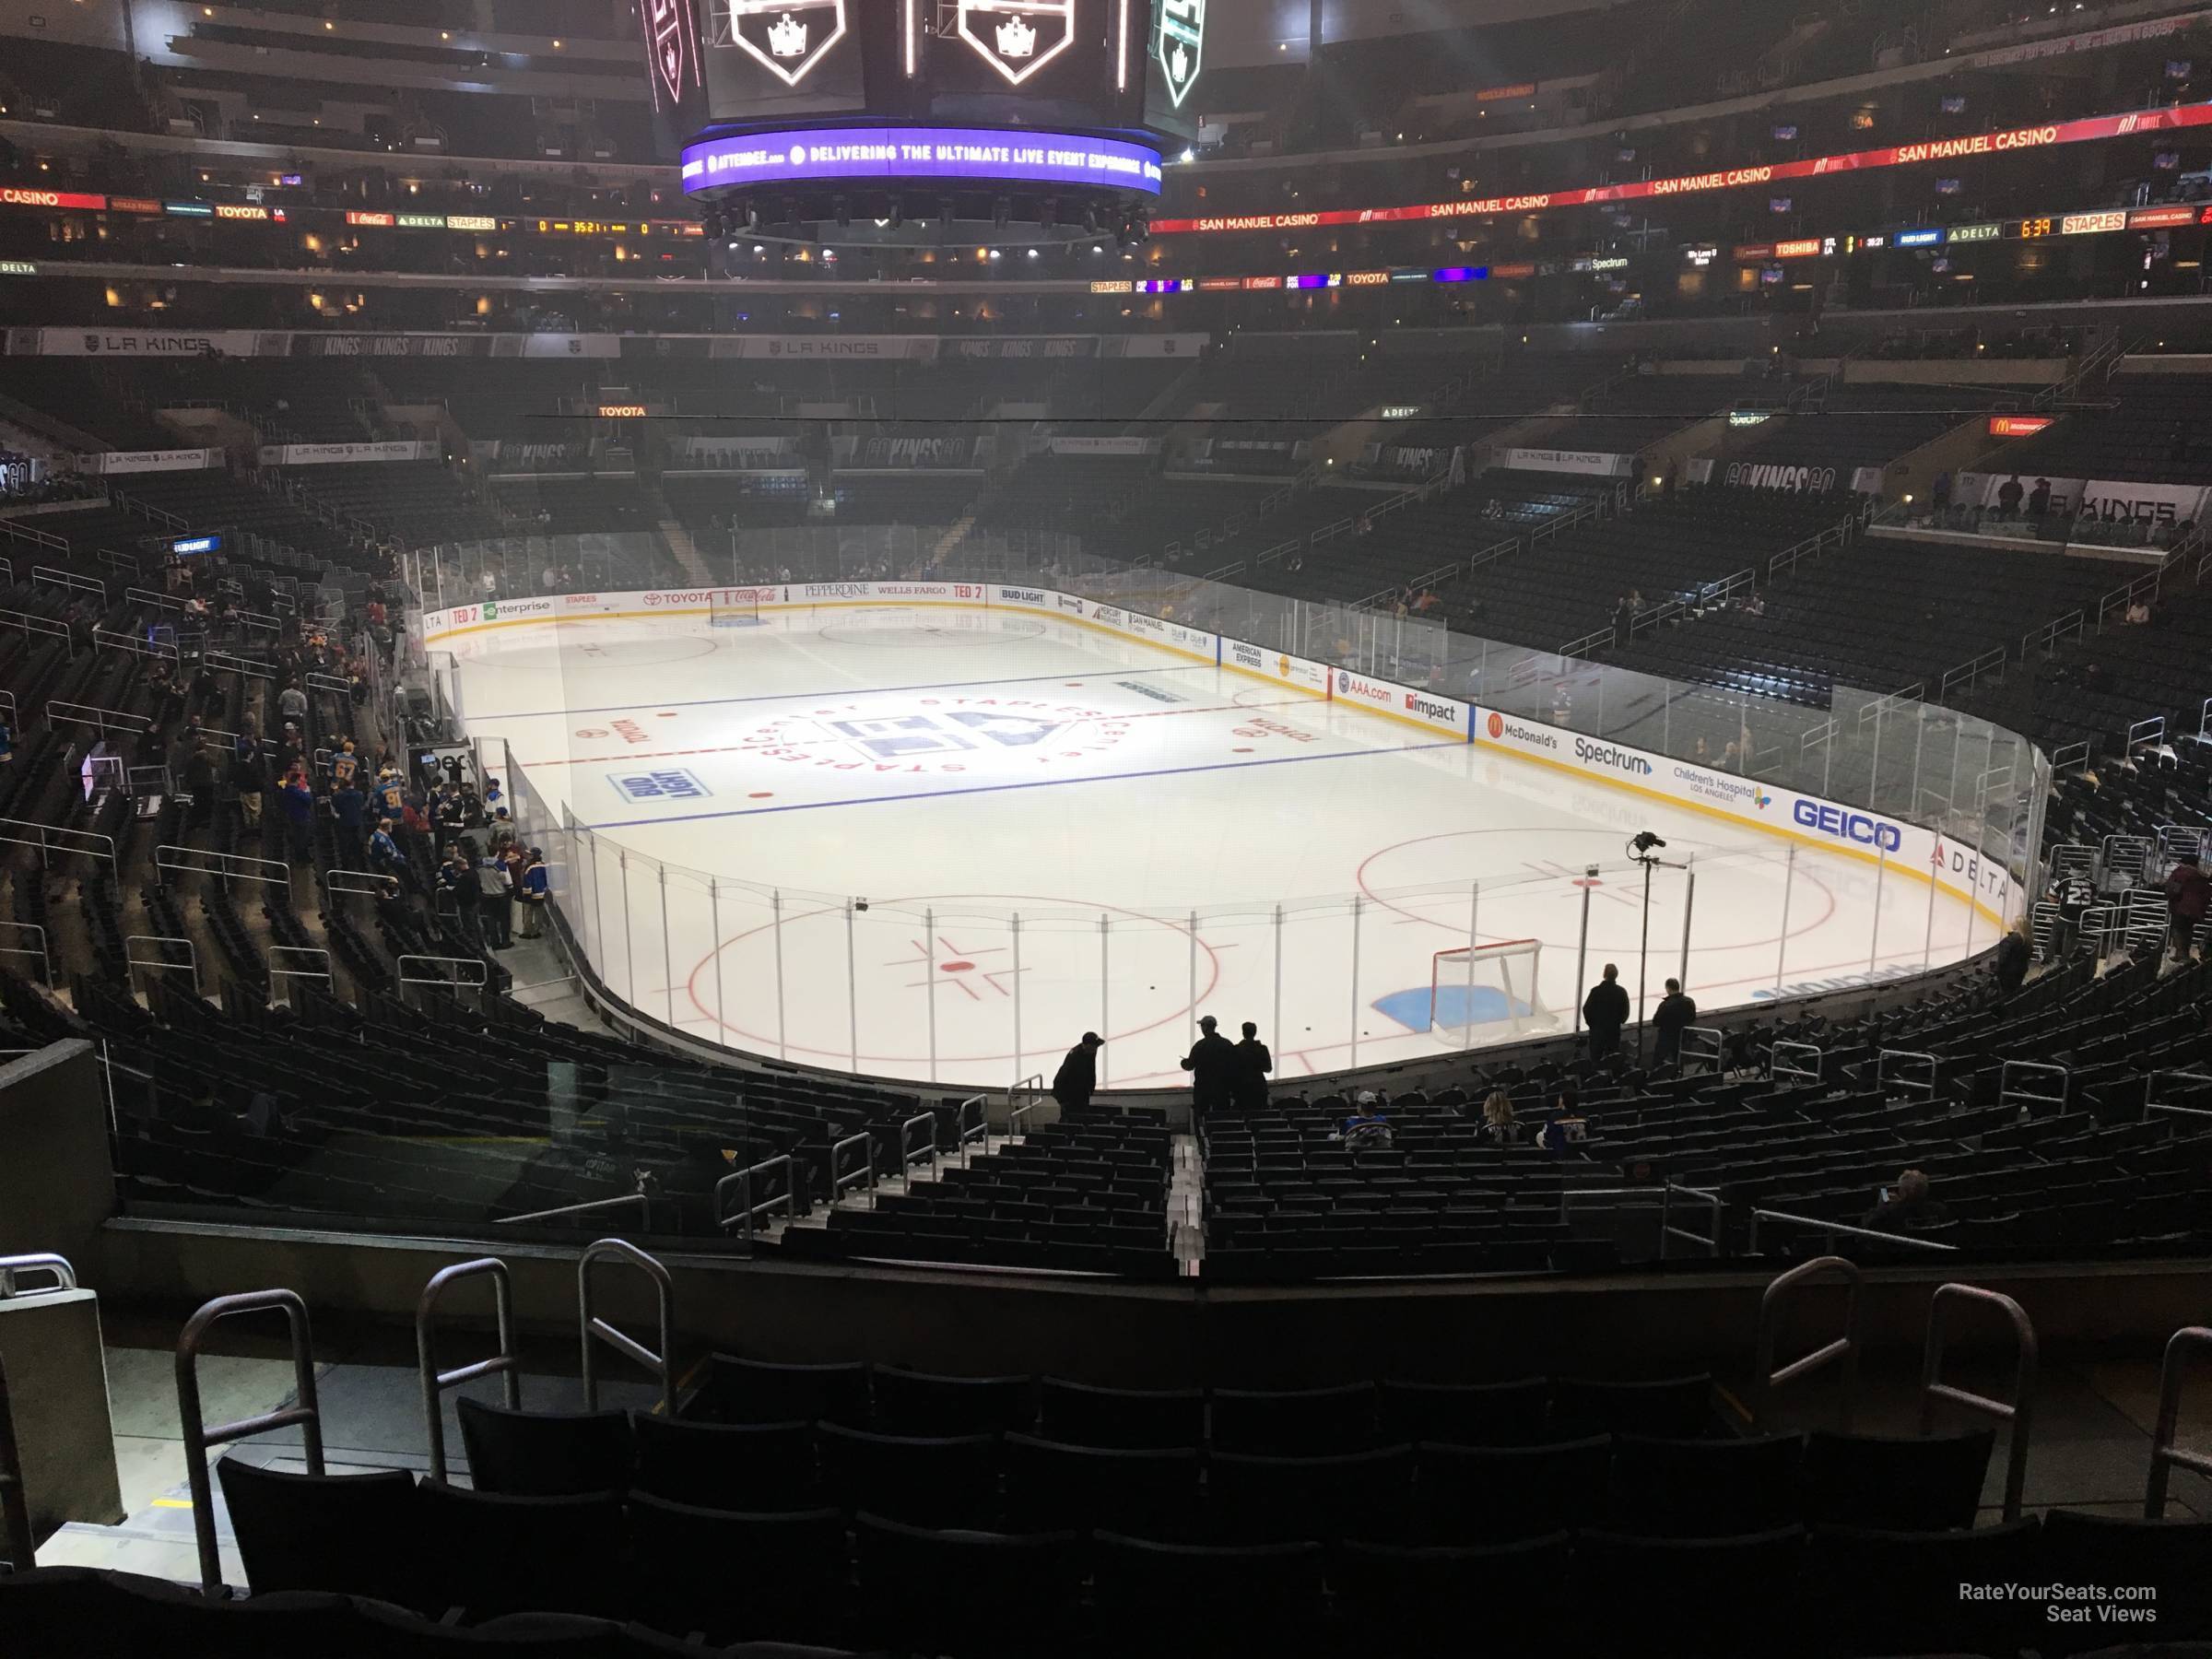 section 218, row 6 seat view  for hockey - crypto.com arena